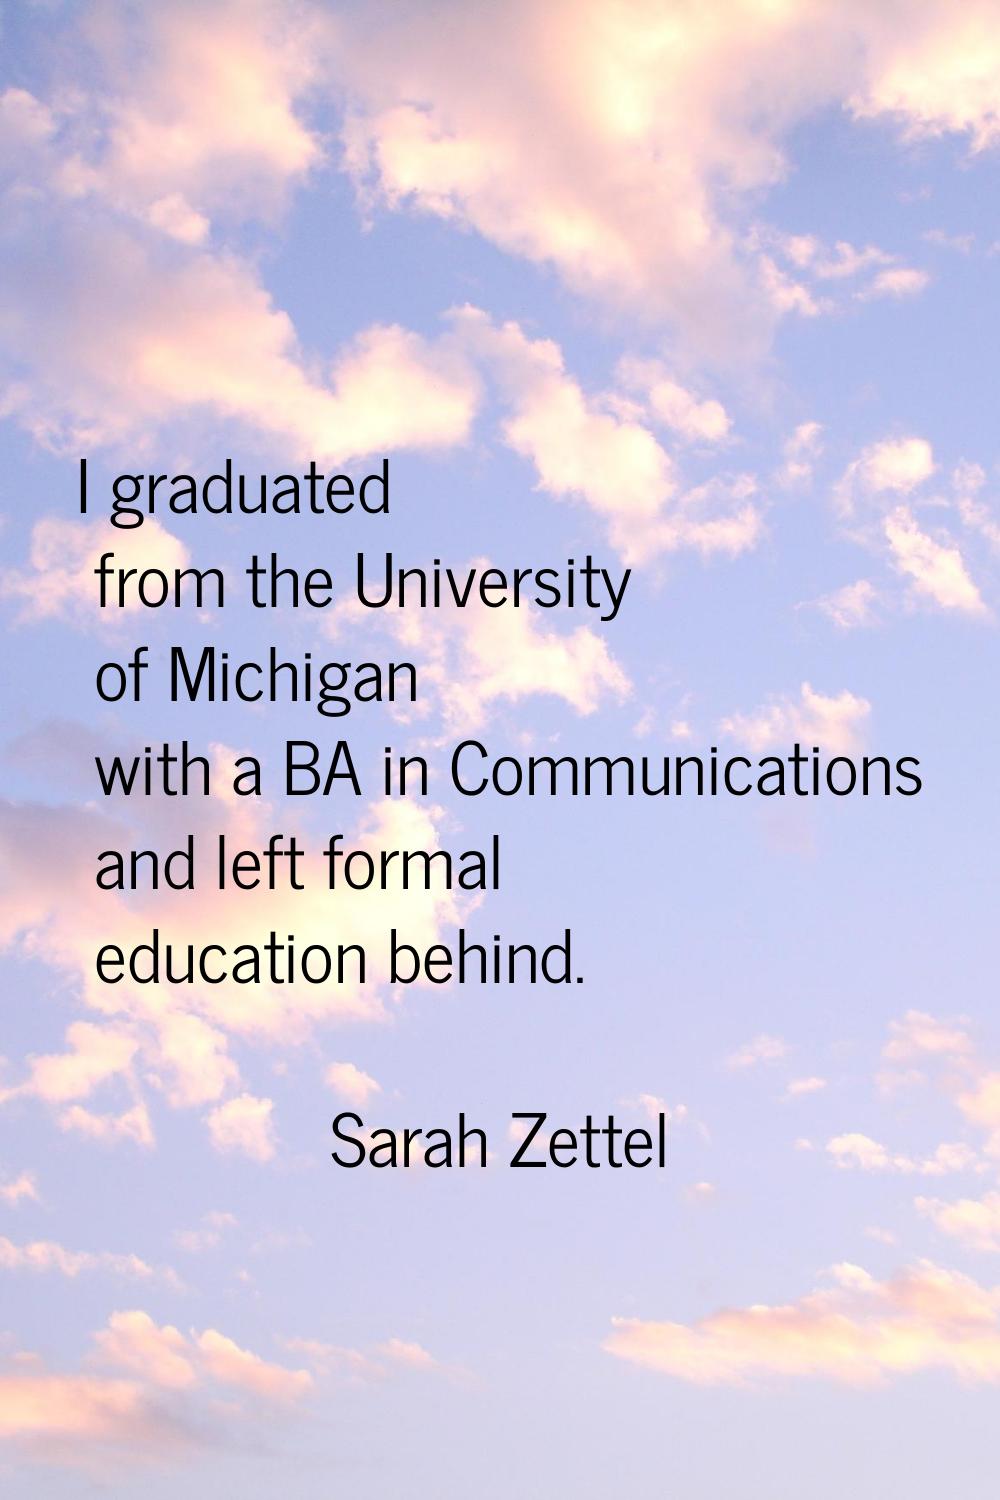 I graduated from the University of Michigan with a BA in Communications and left formal education b